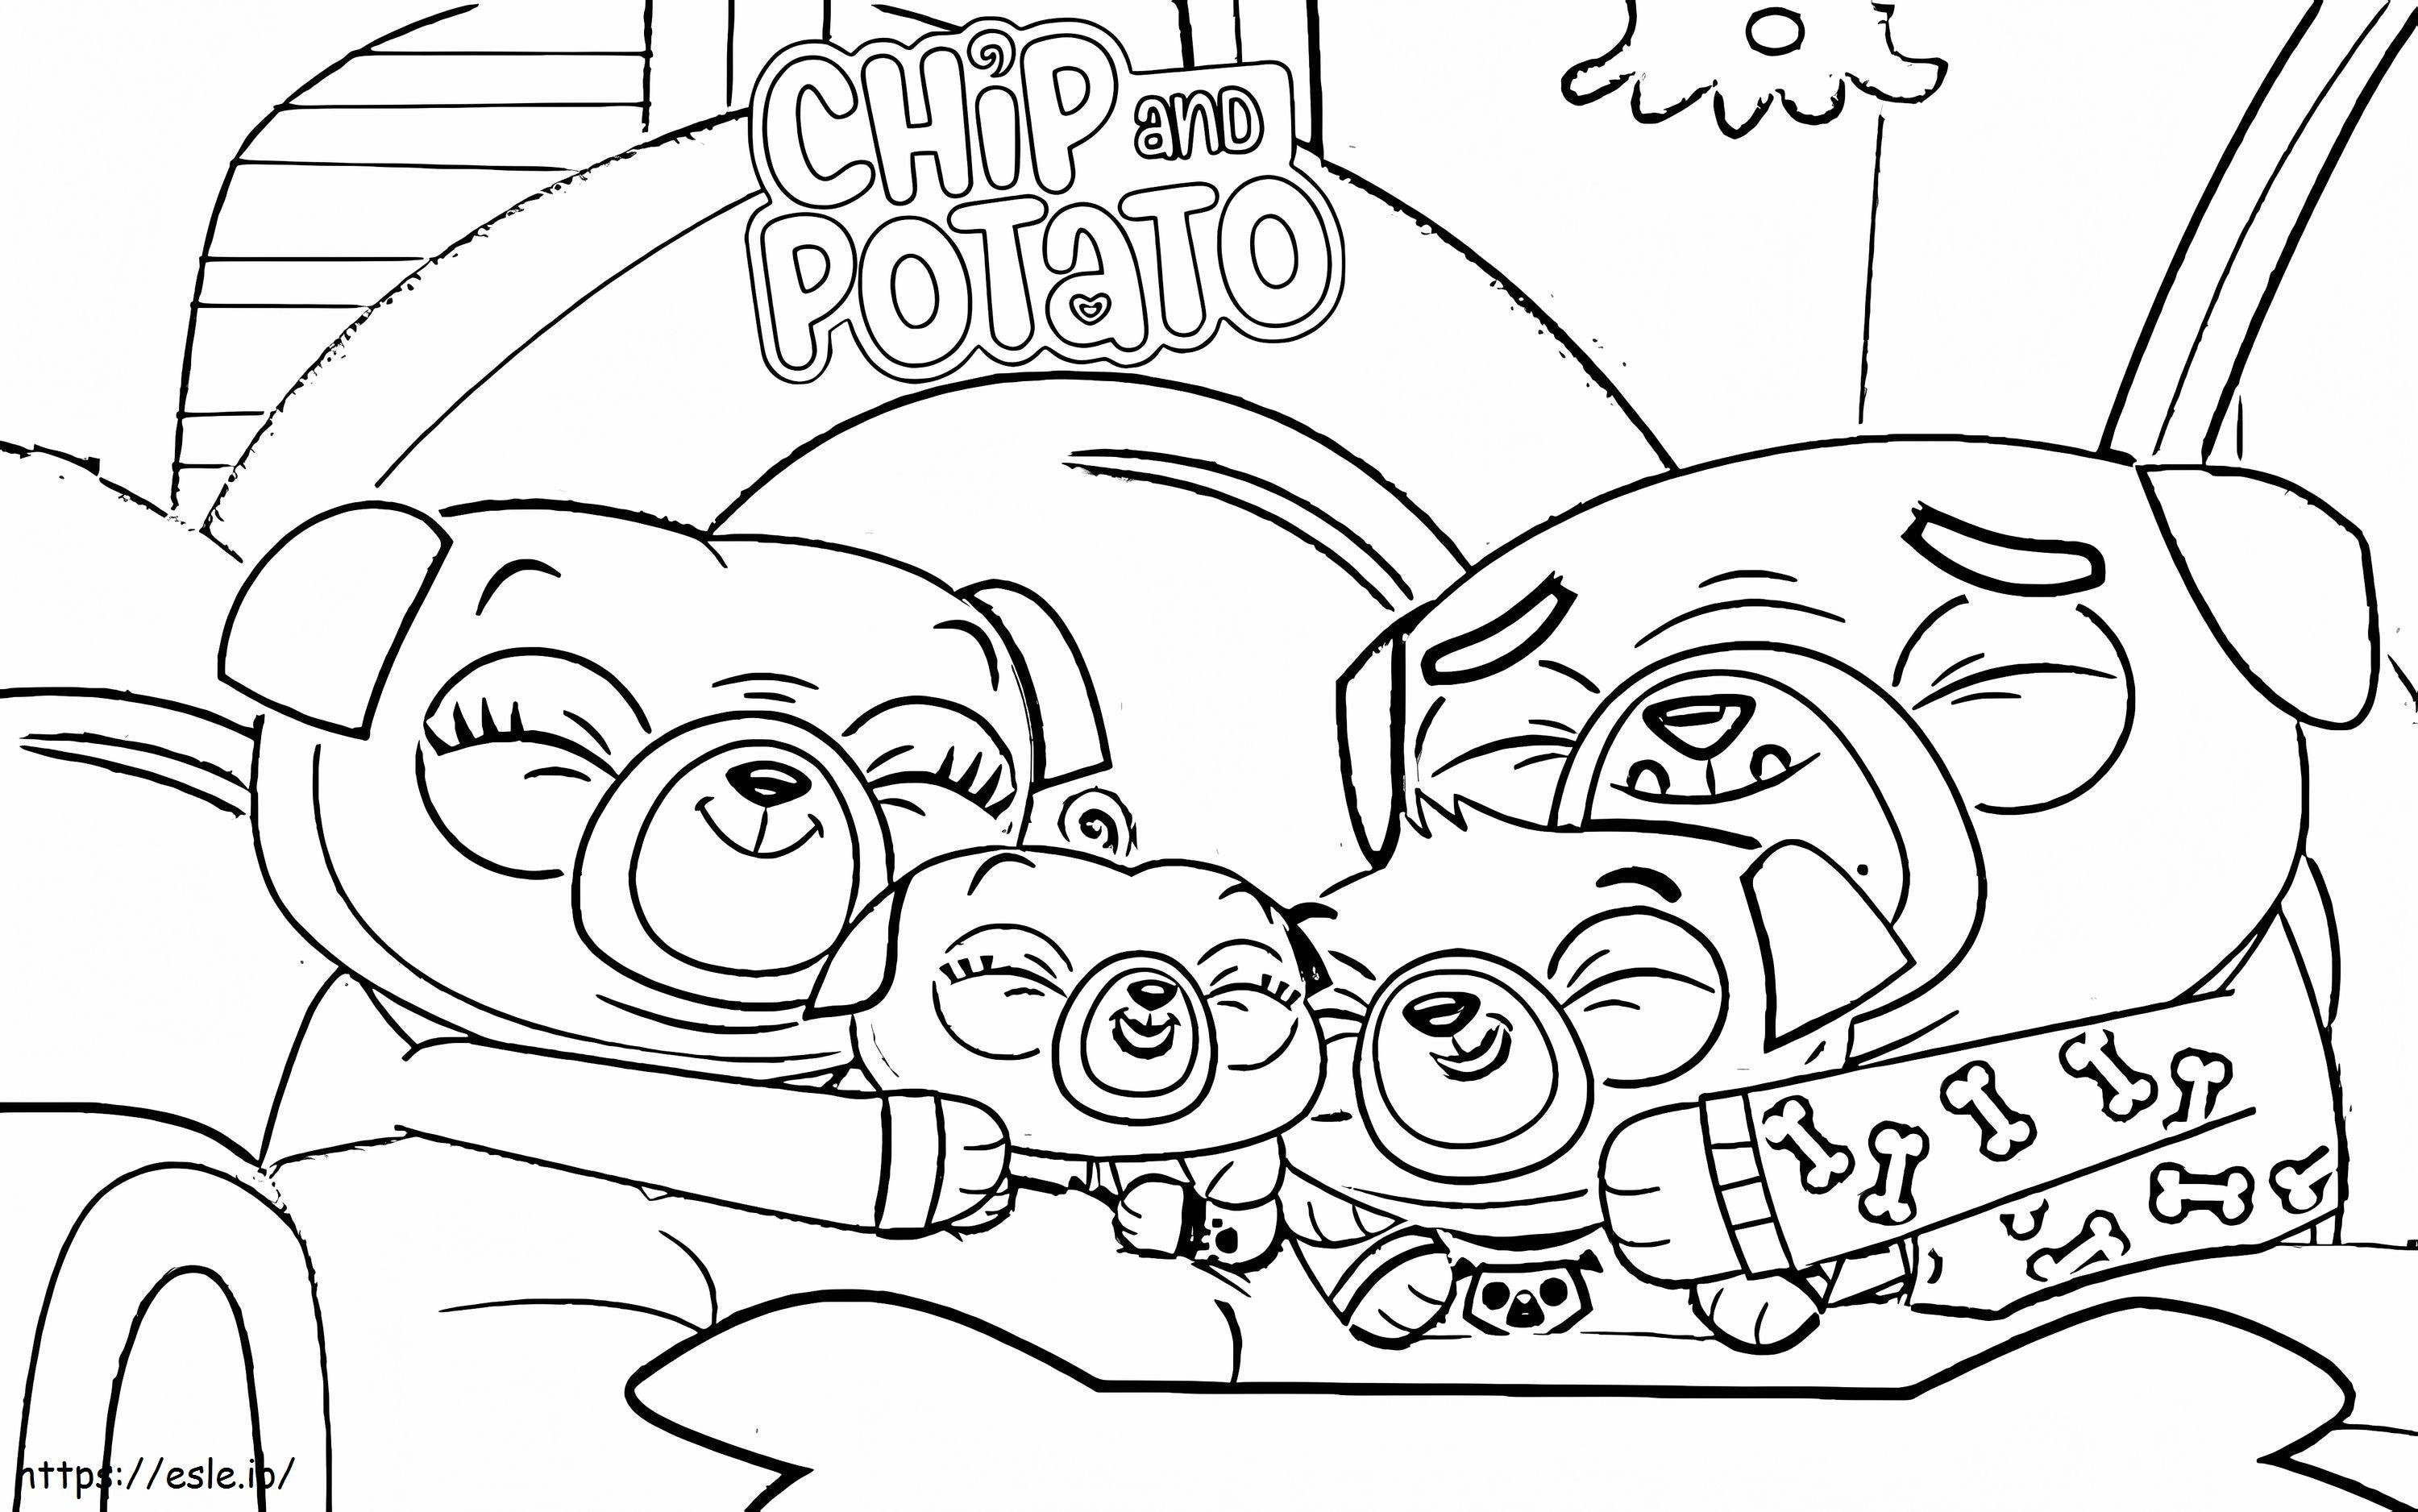 Chip Family coloring page